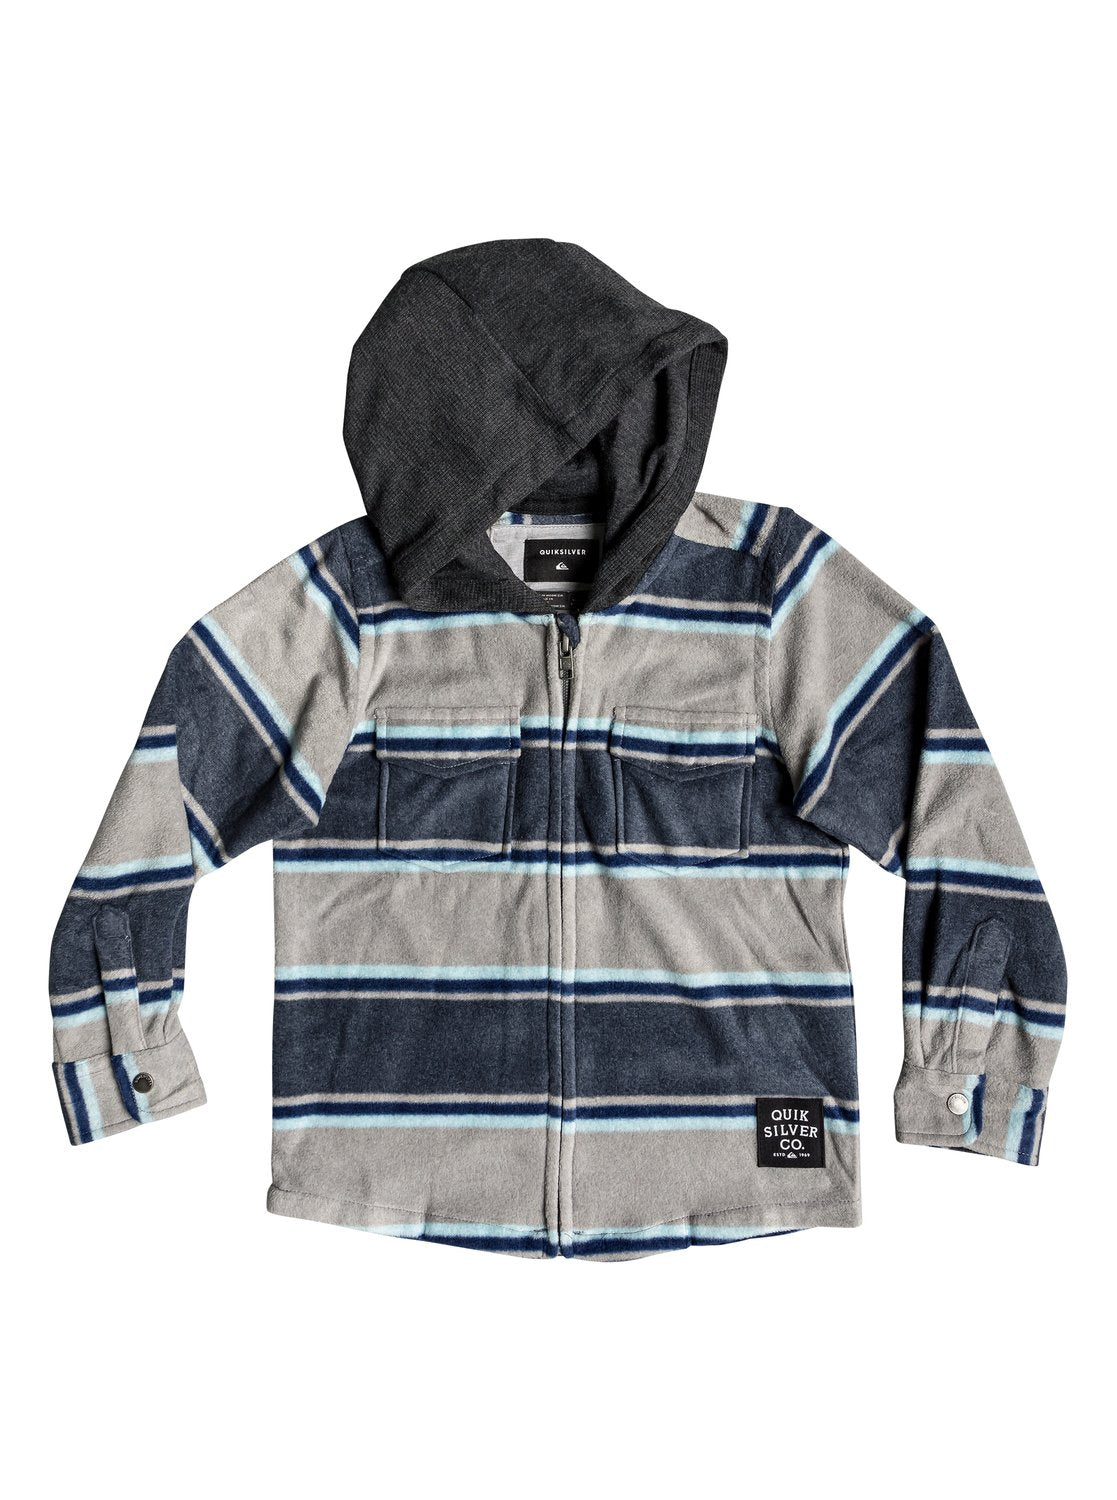 Quiksilver Surf Days Youth Jacket BST3 7X